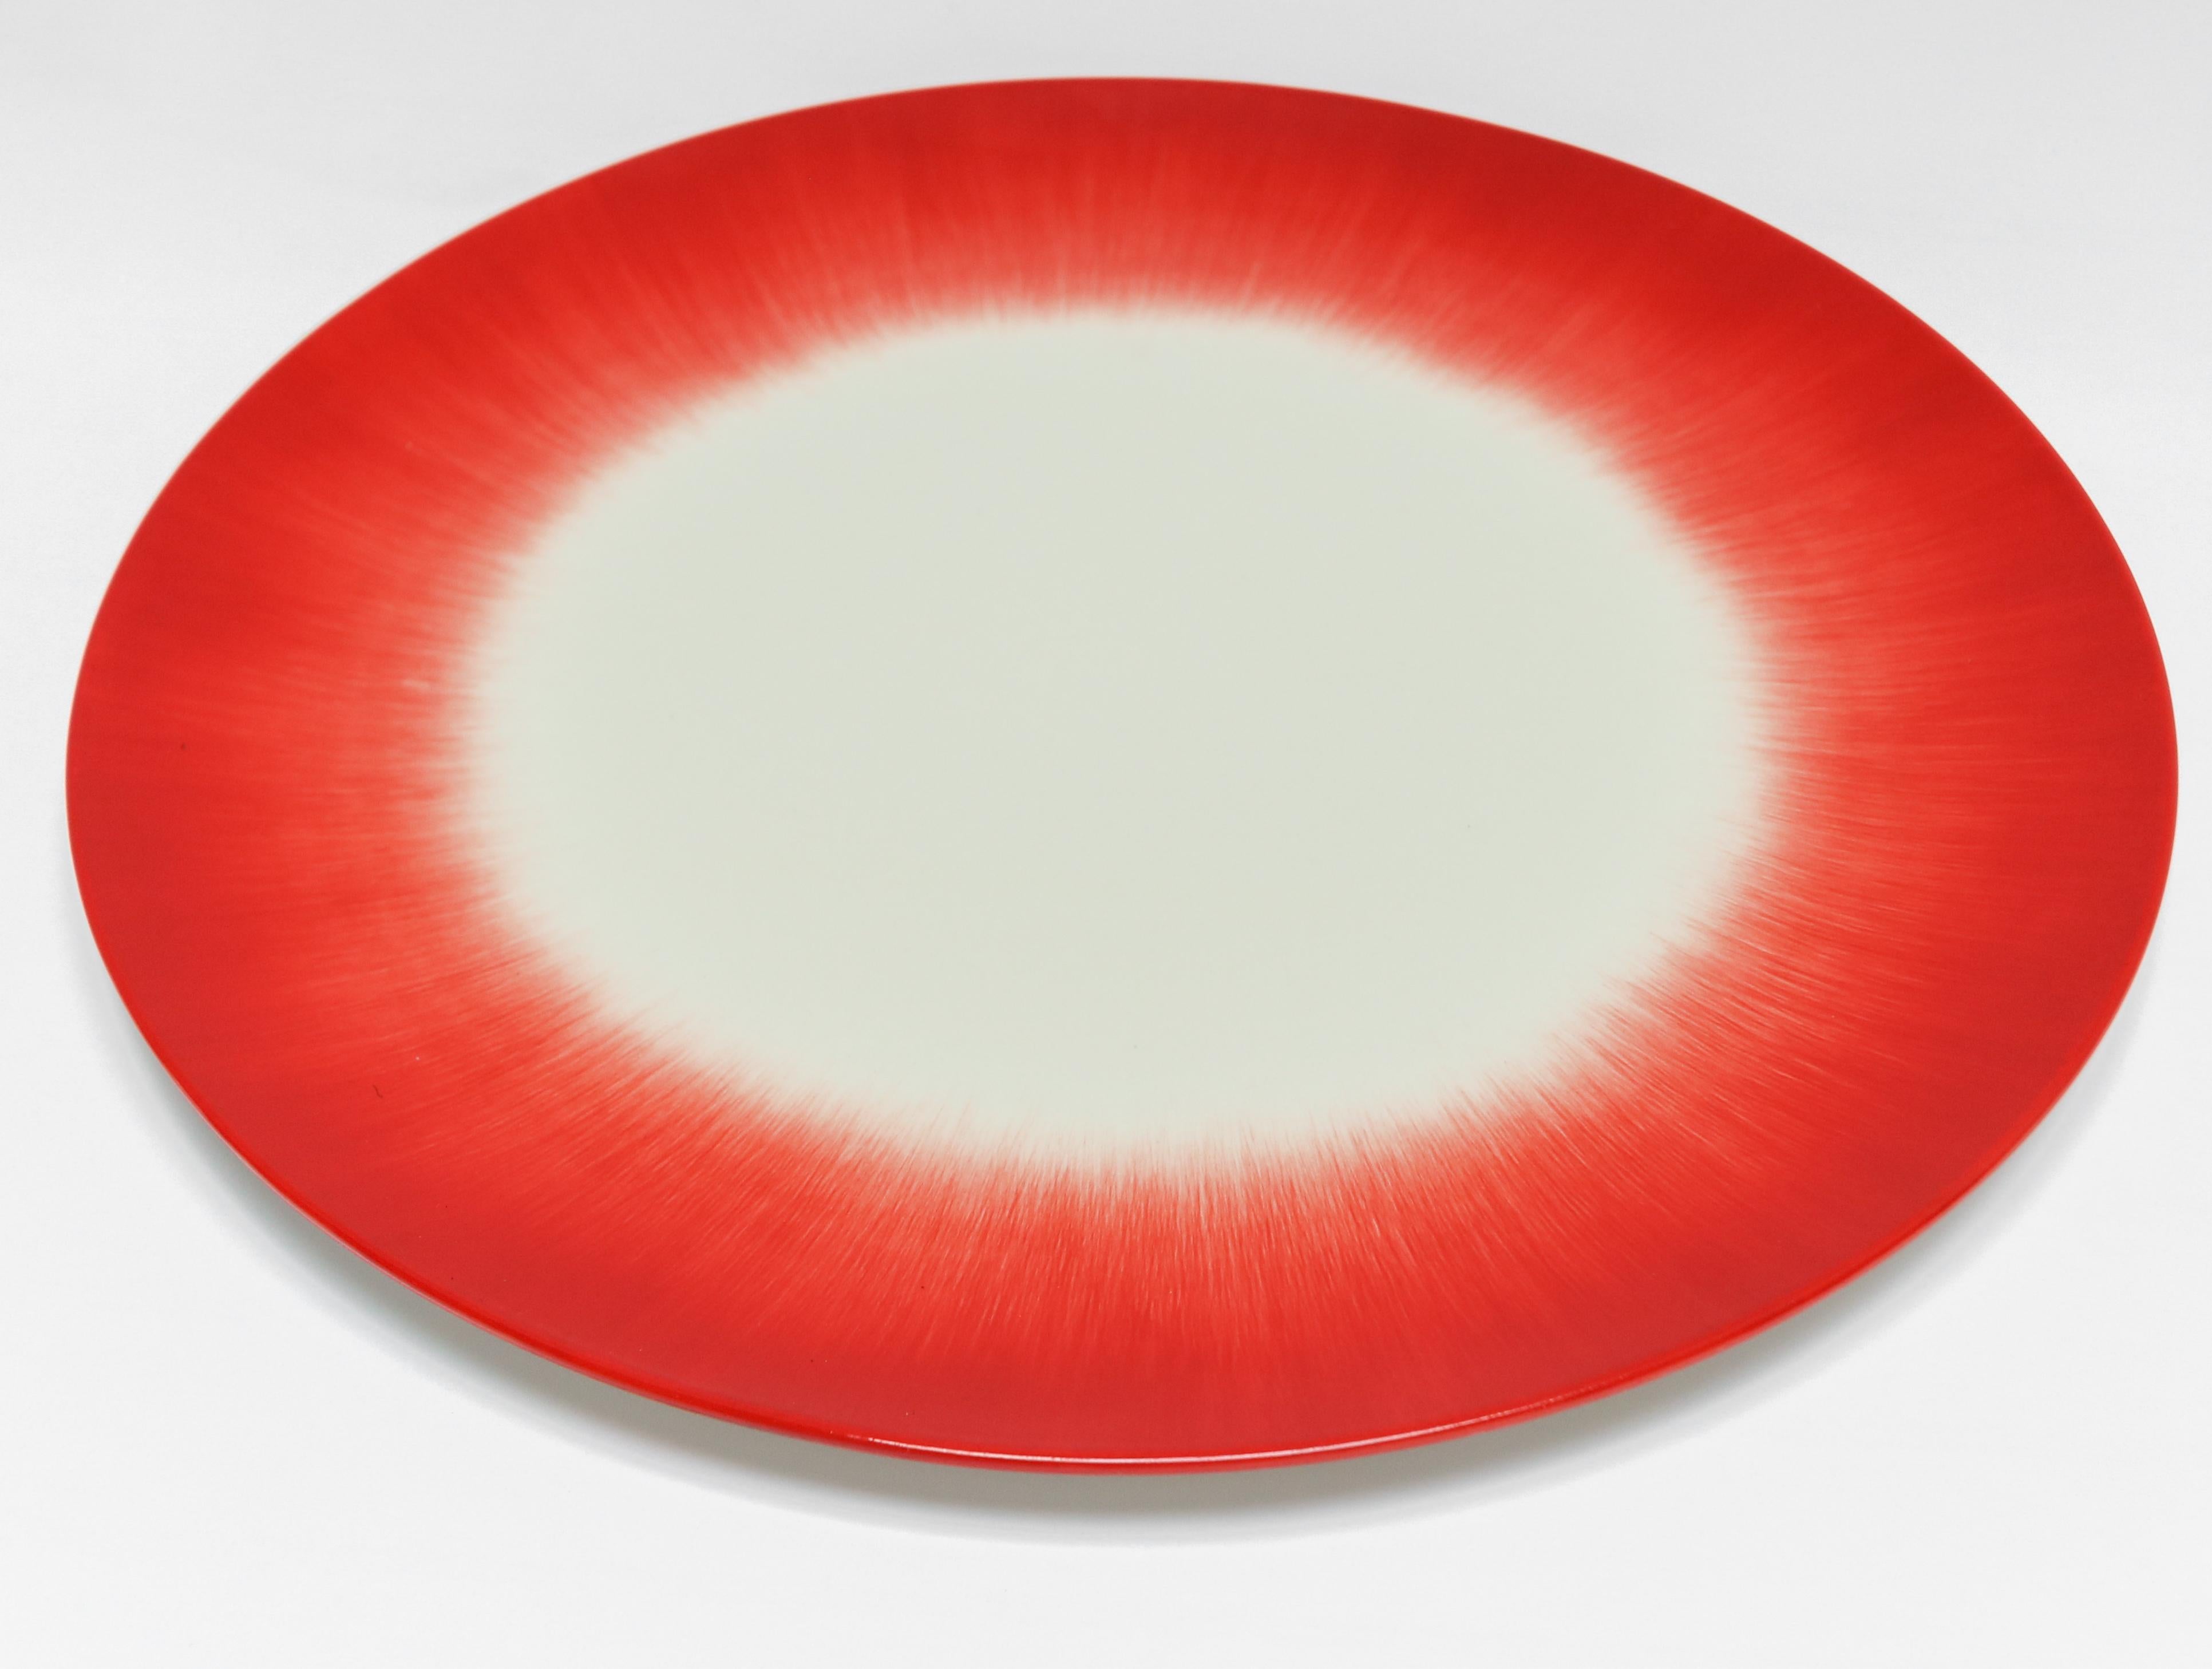 Ann Demeulemeester for Serax Dé dinner plate in off white / red. Hand painted with a starburst pattern. 24cm diameter x 1.1 cm high. Must be purchased in quantities of two.